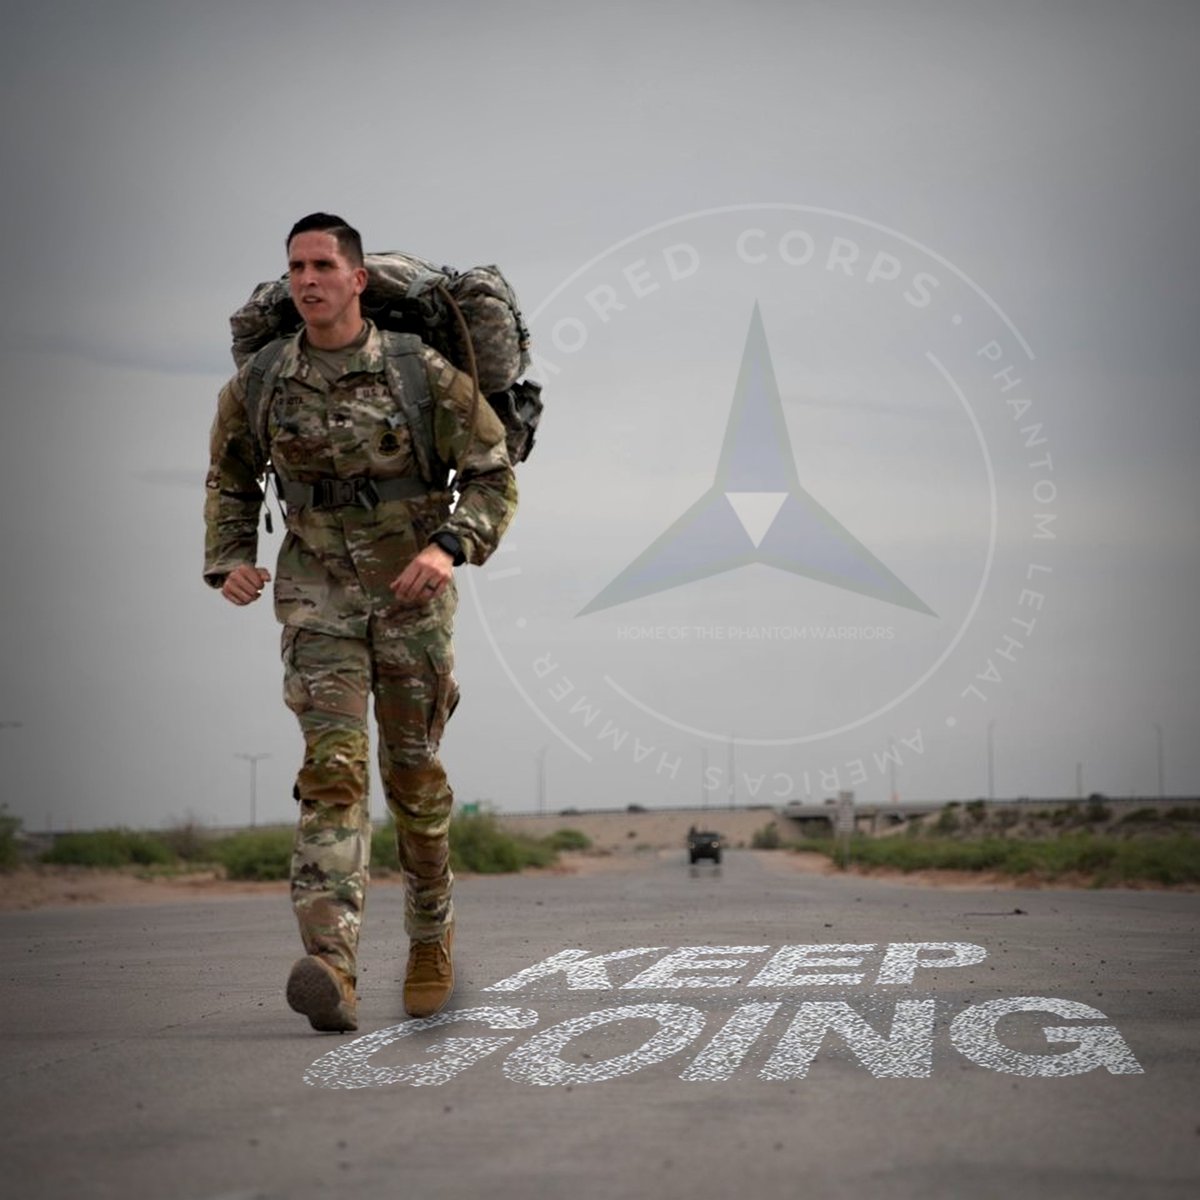 #MondayMotivation #89thMPB
Keep going! Your hard work inspires those around you. Pick those up that need a little extra help, and keep putting one foot in front of the other!

#KeepGoing #ProvenInBattle #MotivationMonday #HardWork #IIIAC